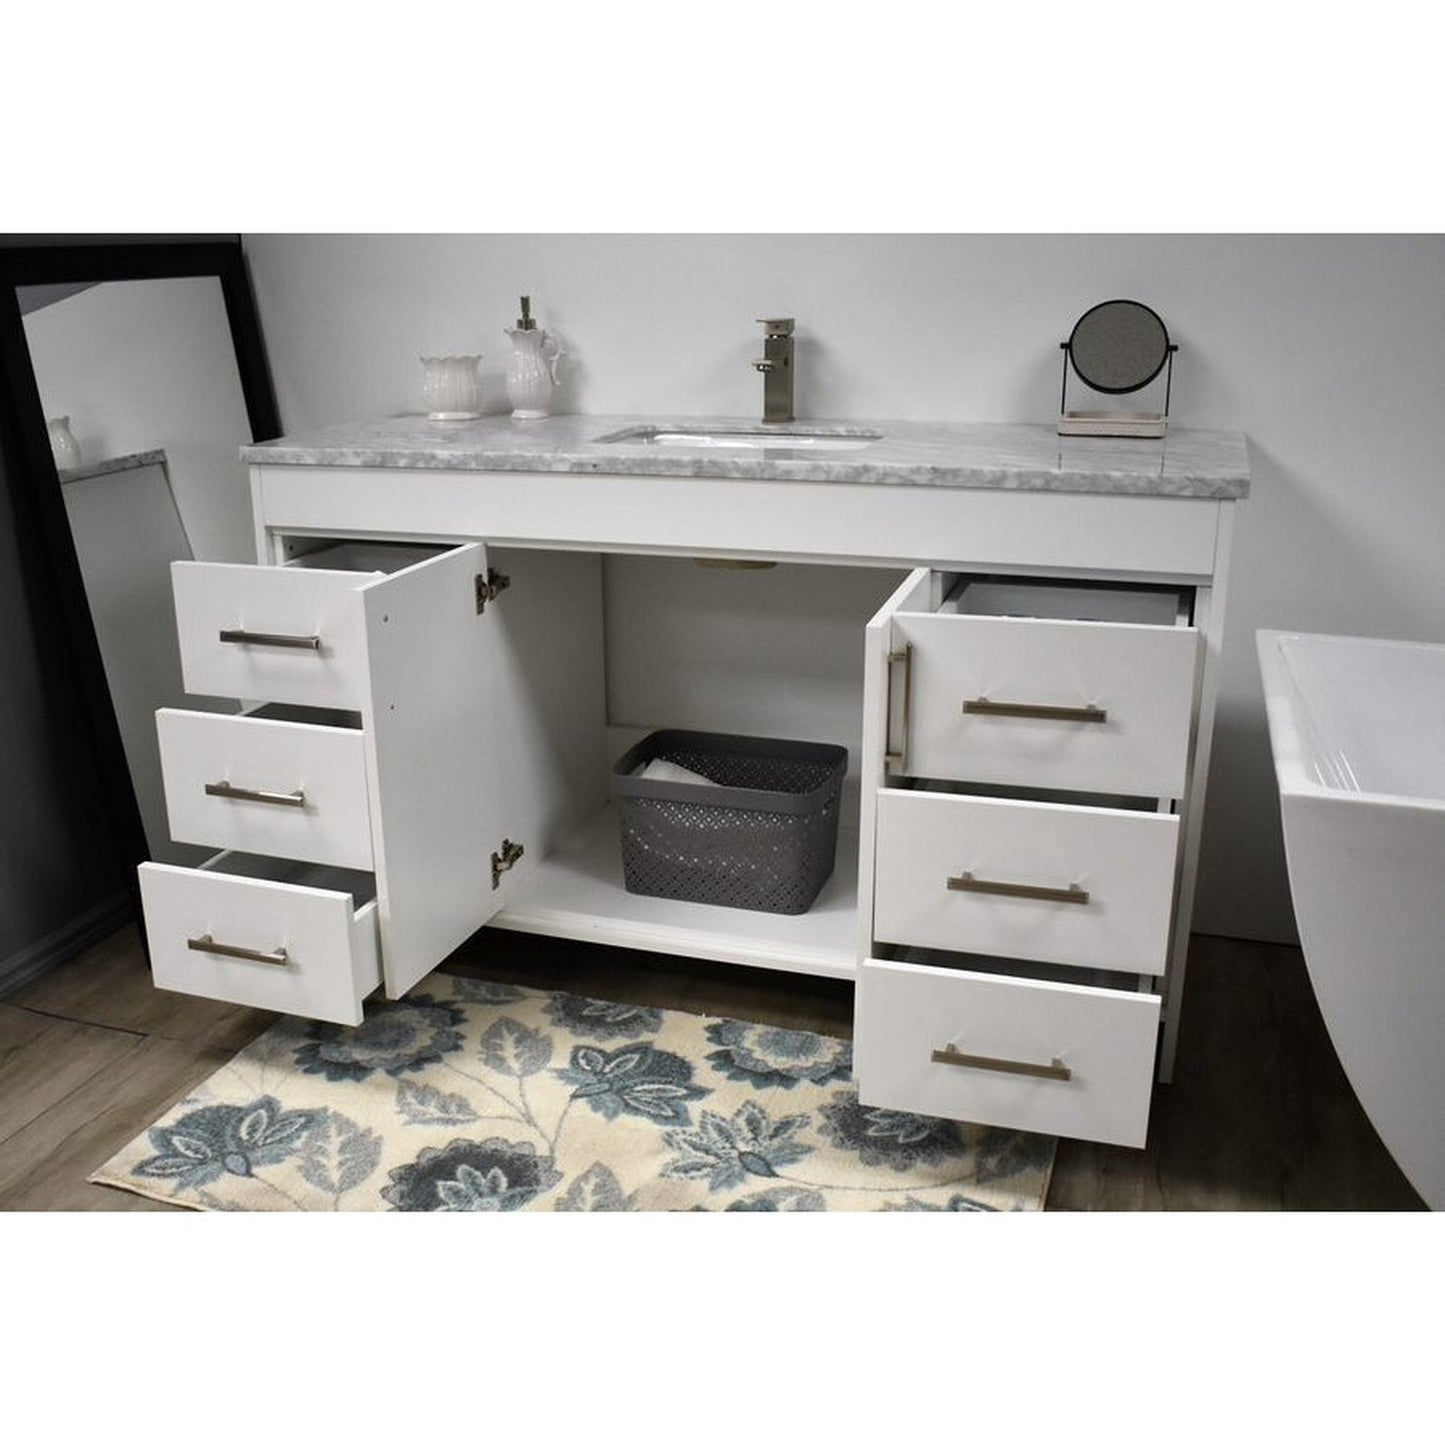 Volpa USA Capri 60" x 22" White Freestanding Modern Bathroom Vanity With Undermount Single Sink and Carrara Marble Top With Brushed Nickel Edge Handles